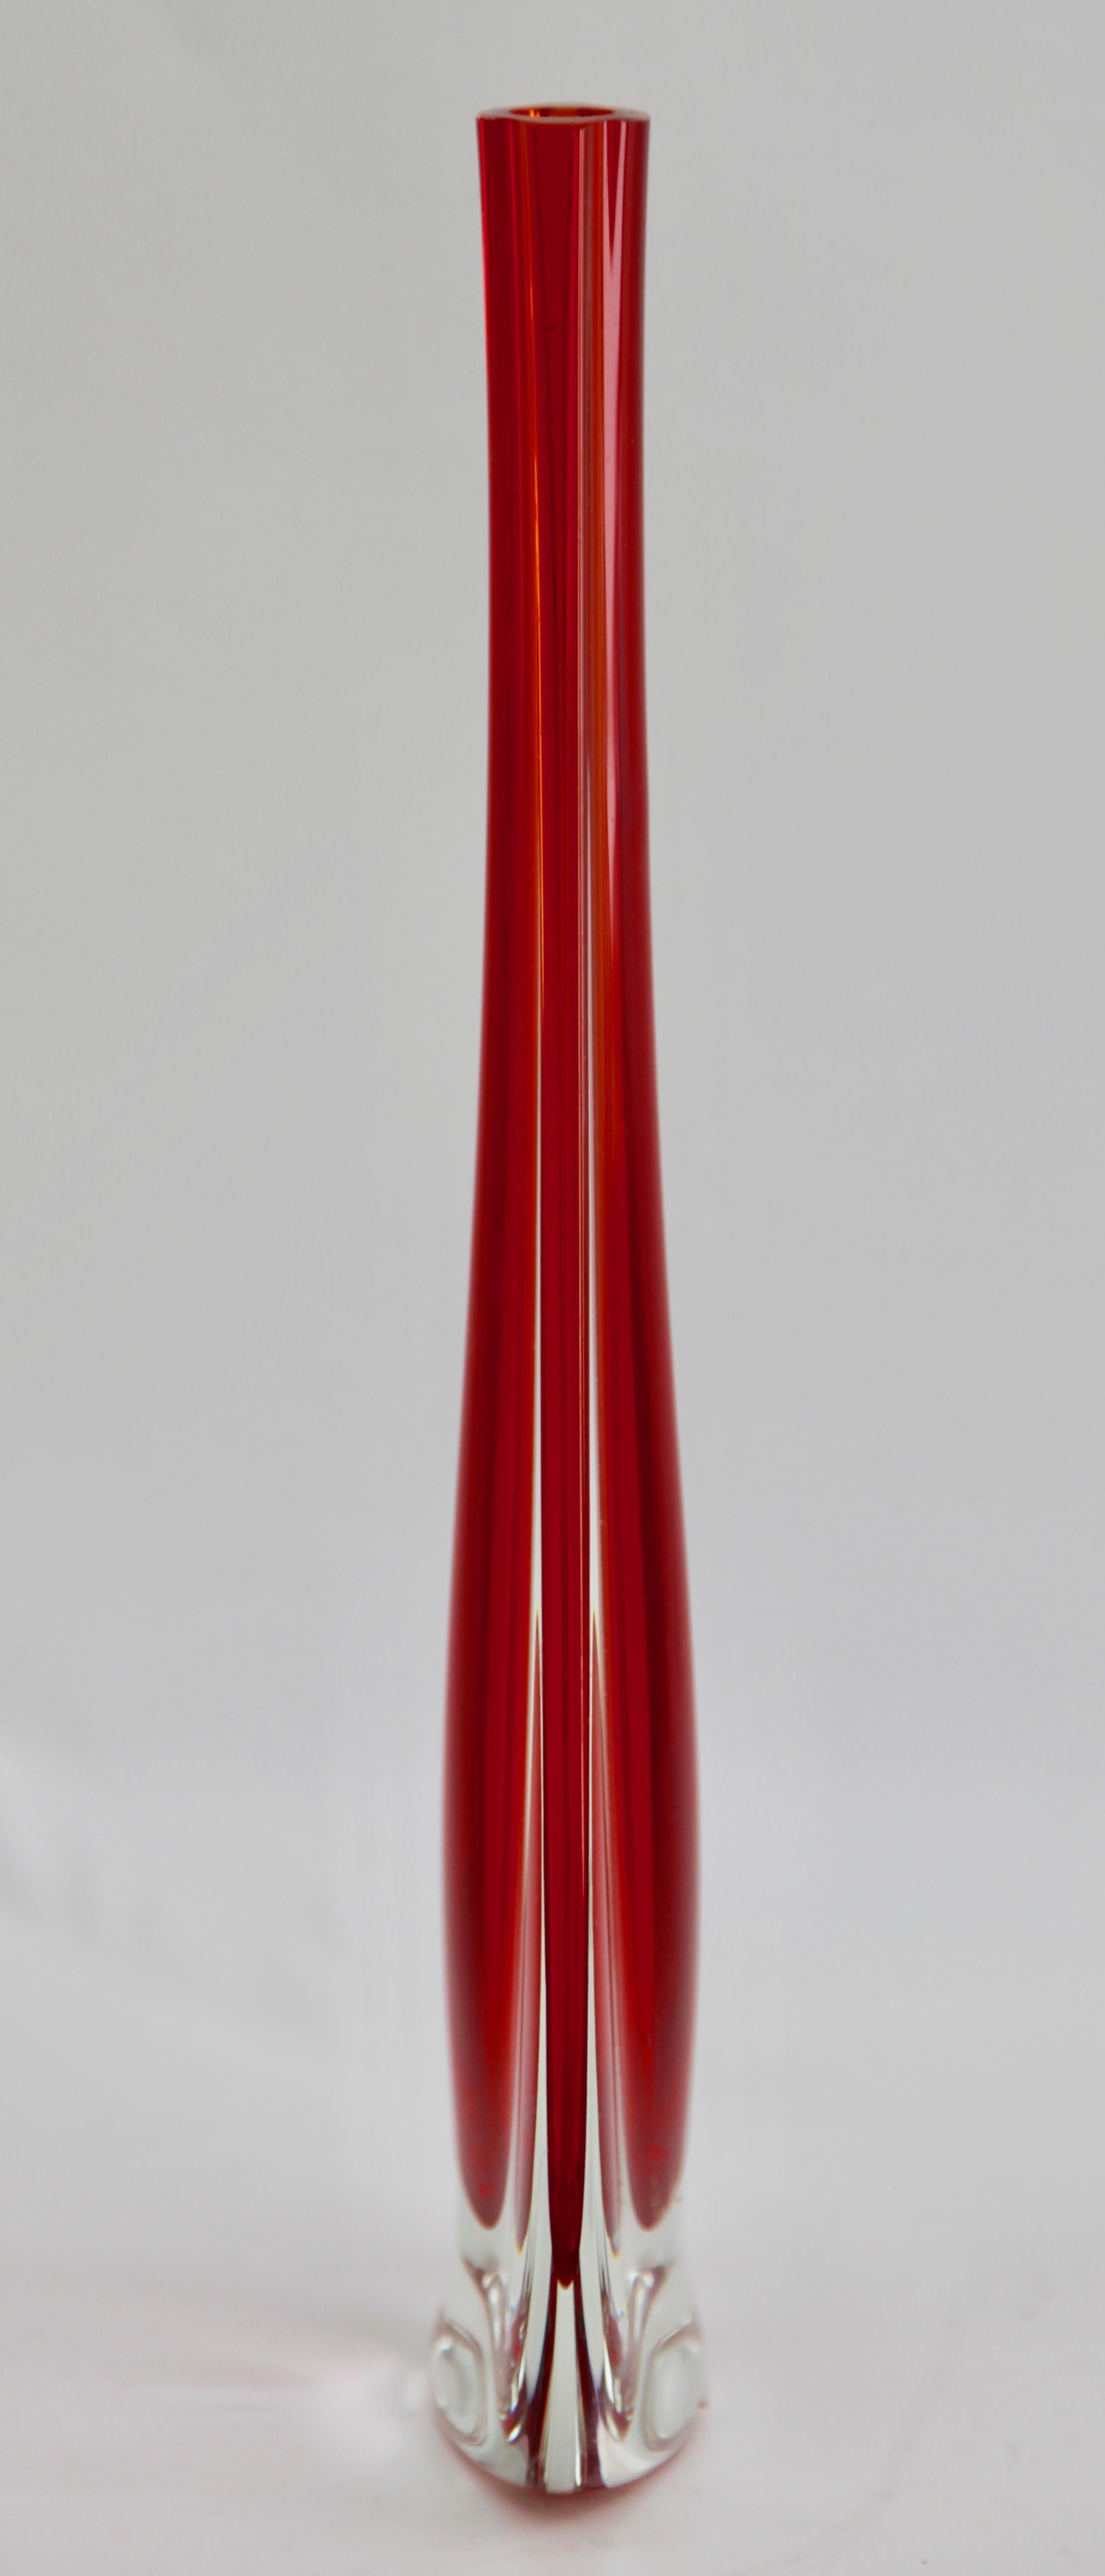 Hand-Crafted Two Murano Drop Vases with Red Core and Thick Sommerso 'Clear Glass Casing'